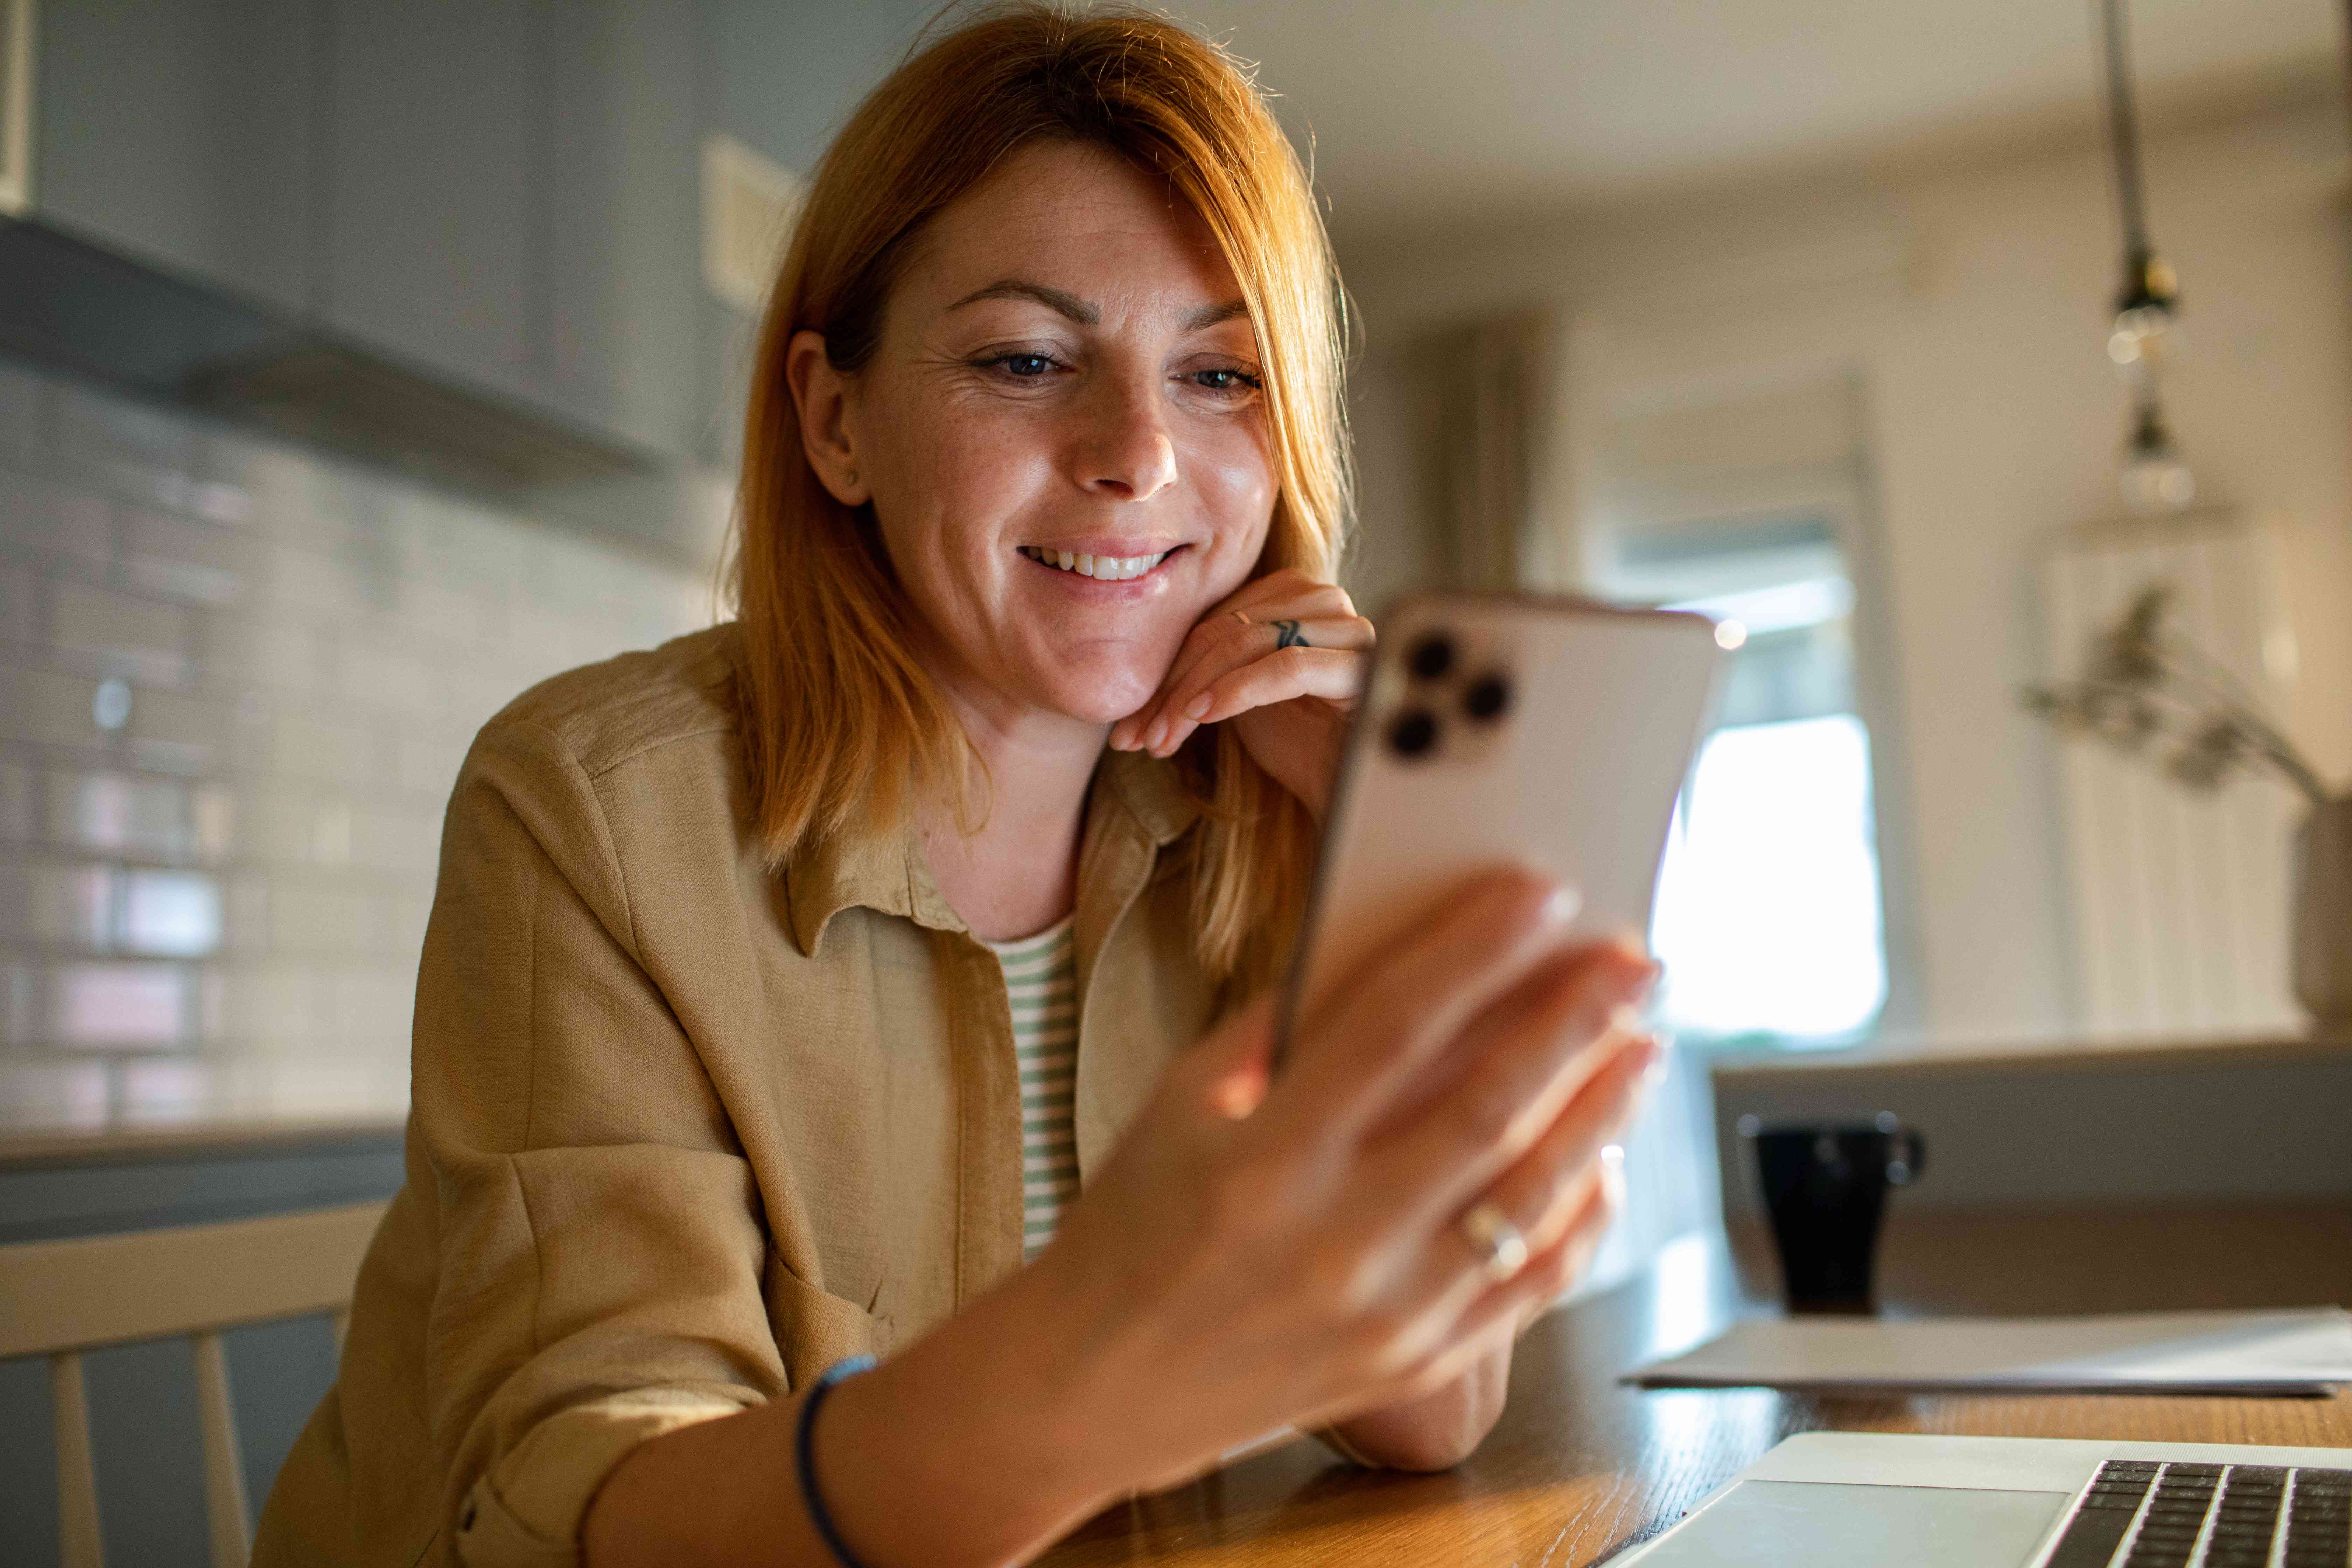 Woman in her 40s sitting in front of a laptop at her kitchen table and smiling as she looks at her smartphone